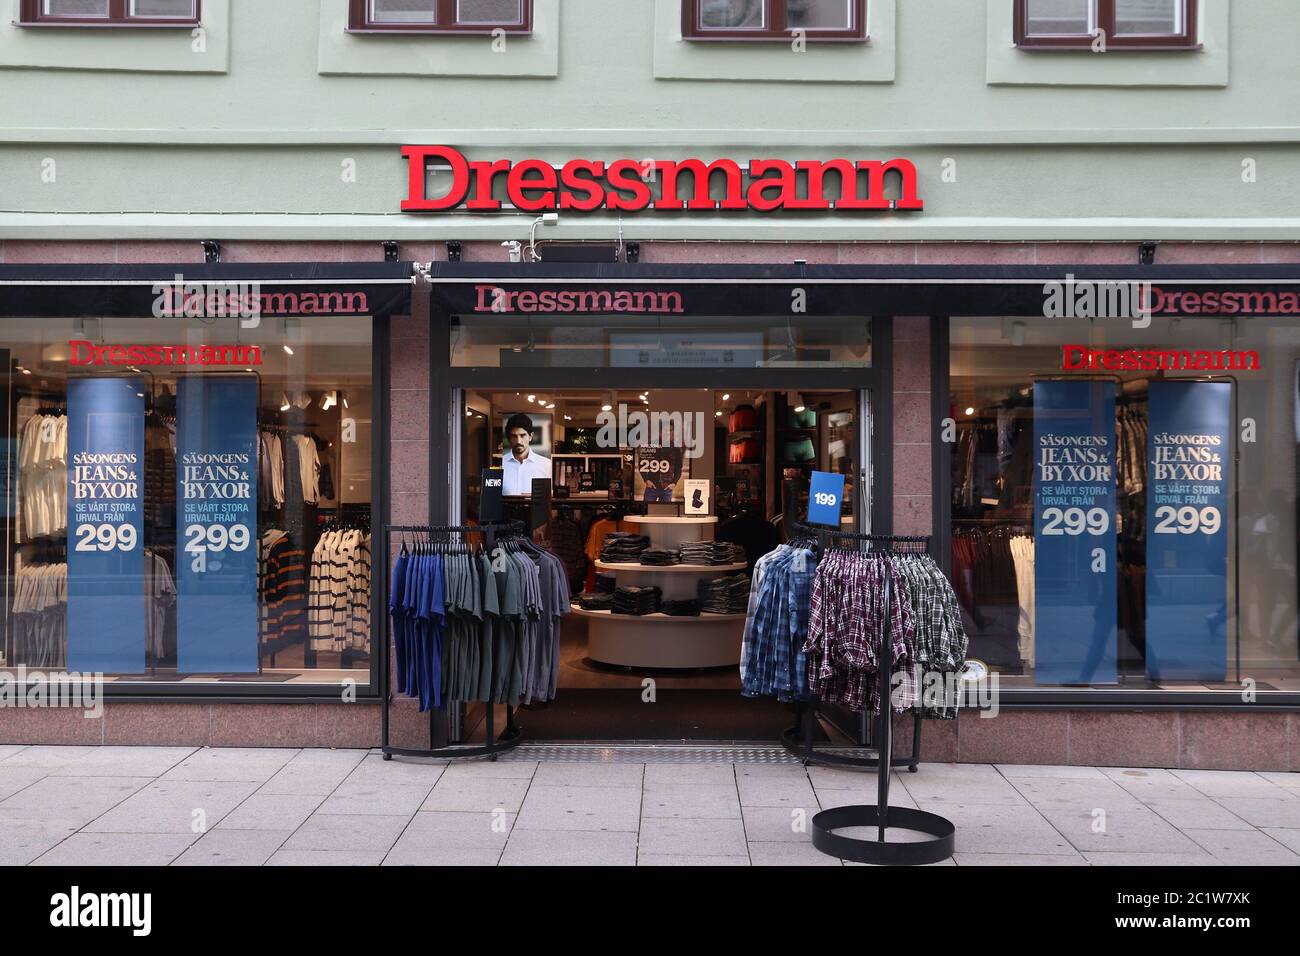 GOTHENBURG, SWEDEN - AUGUST 26, 2018: Dressmann store at Kungsgatan street  in Gothenburg, Sweden. Dressmann fashion store chain is owned by Varner-Gru  Stock Photo - Alamy